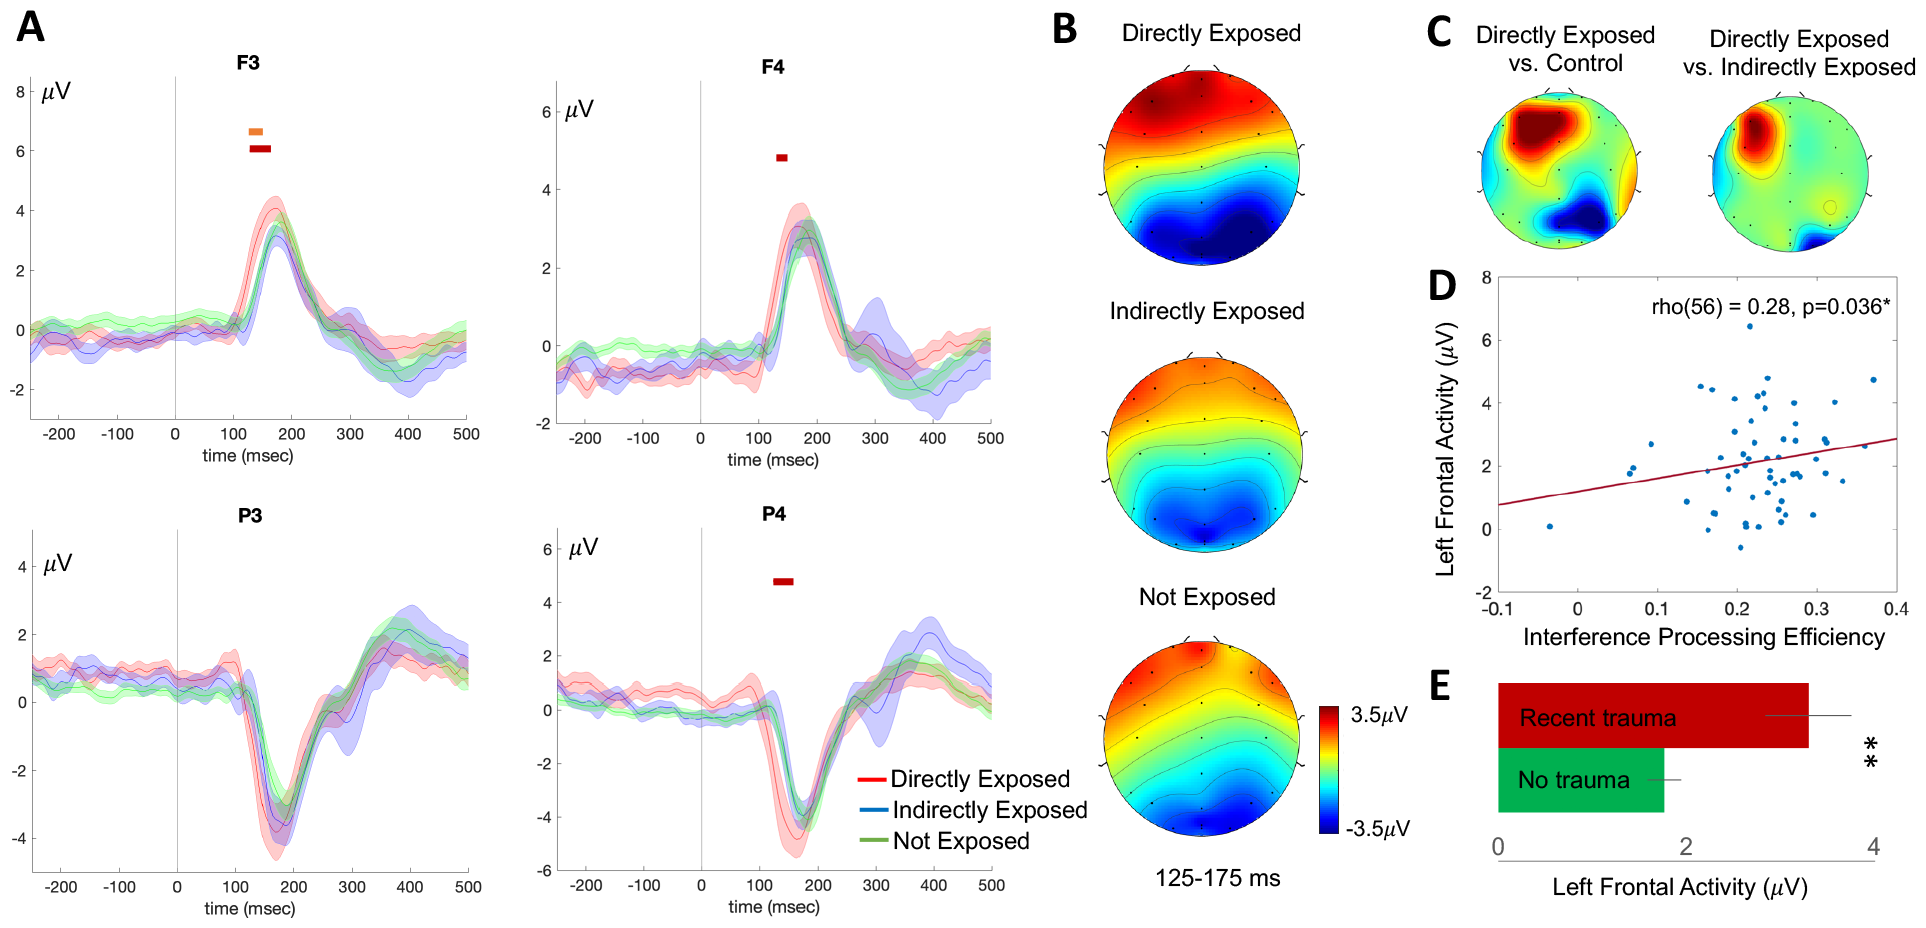 Cognitive differences between groups of people who were directly exposed to the Camp Fire in 2018, people who were indirectly exposed (who witnessed the fire but were not directly impacted), and age- and gender-matched non-exposed controls. Event-related potential responses (ERPs) elicited on the interference processing task and their relationship to behavior. (A) Group averaged ERPs ± standard error are shown at frontal (F3, F4) and parietal (P3, P4) channels corresponding to the directly exposed (red), indirectly exposed (blue) and unexposed control (green) groups. Red and orange bars depict significant peak amplitude differences between the directly exposed vs. control group, and the directly exposed vs. indirectly exposed group (p<0.05, permutation tested across time). (B) Group averaged ERP scalp topographies are plotted in the peak 125–175 ms latency window. (C) Peak ERP scalp topographies of the directly exposed group masked by group ttest comparisons show significant left frontal and right parietal activity differences; group comparisons at all electrodes are thresholded at p<0.05. (D) Significant partial correlations are observed between peak left frontal activity (average of F3, FC3 channels) and interference processing efficiency, accounting for exposure group. (E) Peak left frontal activity is significantly greater in individuals reporting recent trauma (p = 0.006). Graphic: Grennan, et al., 2023 / PLOS Climate